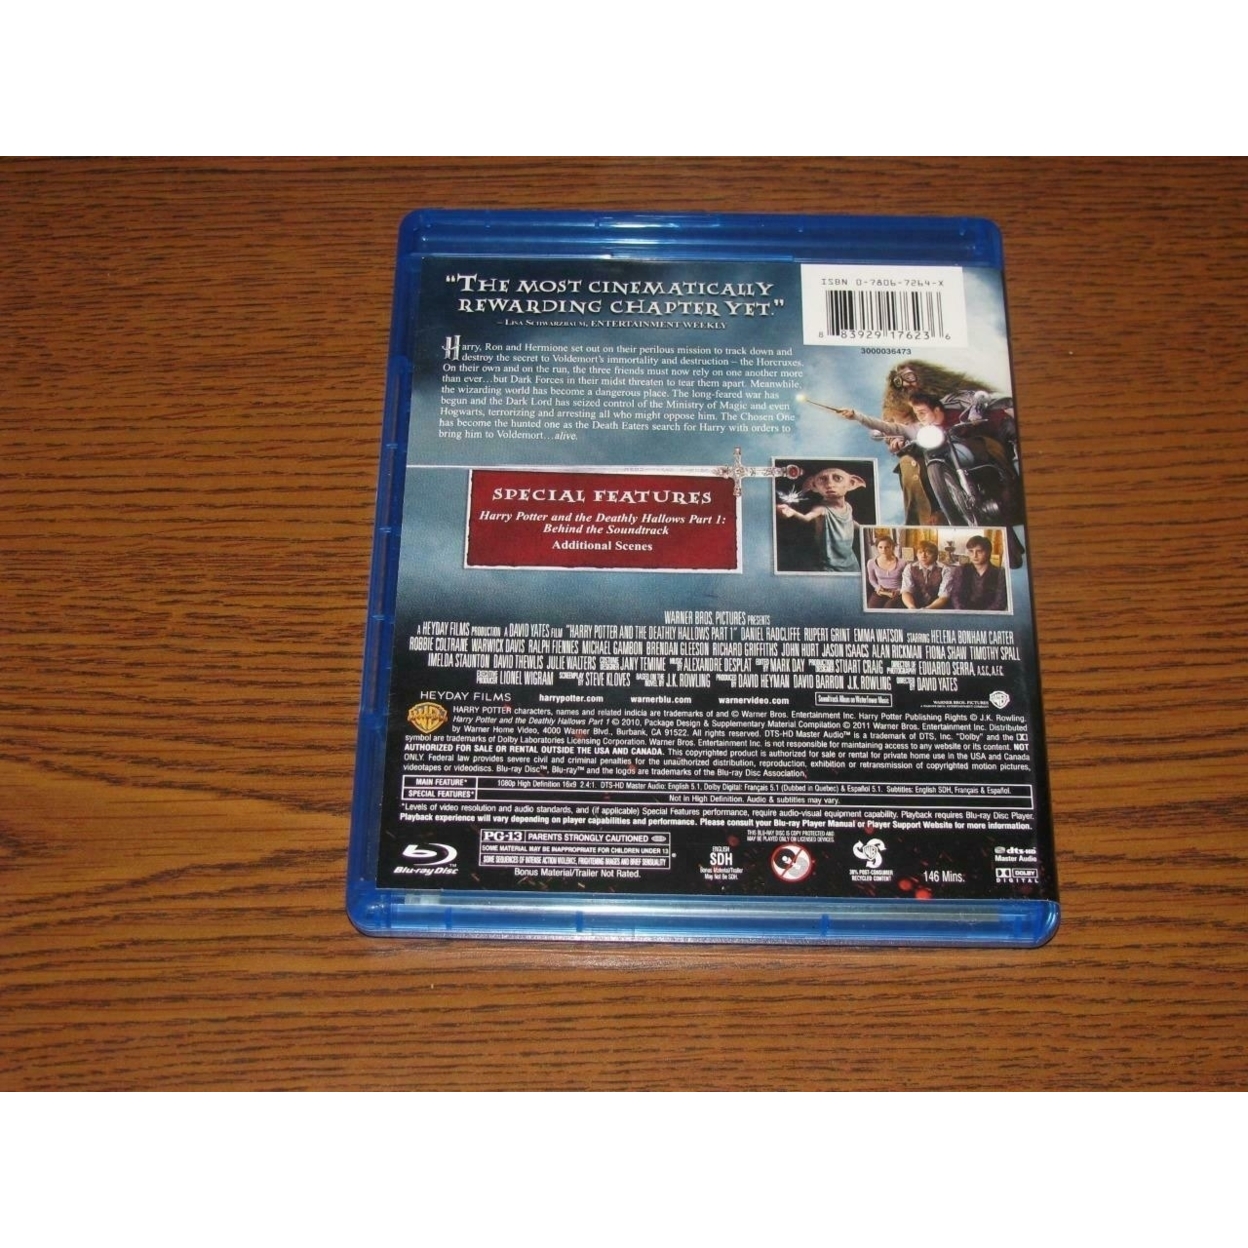 Harry Potter And The Deathly Hallows Part 1 Widescreen (Blu-ray) - image 3 of 3